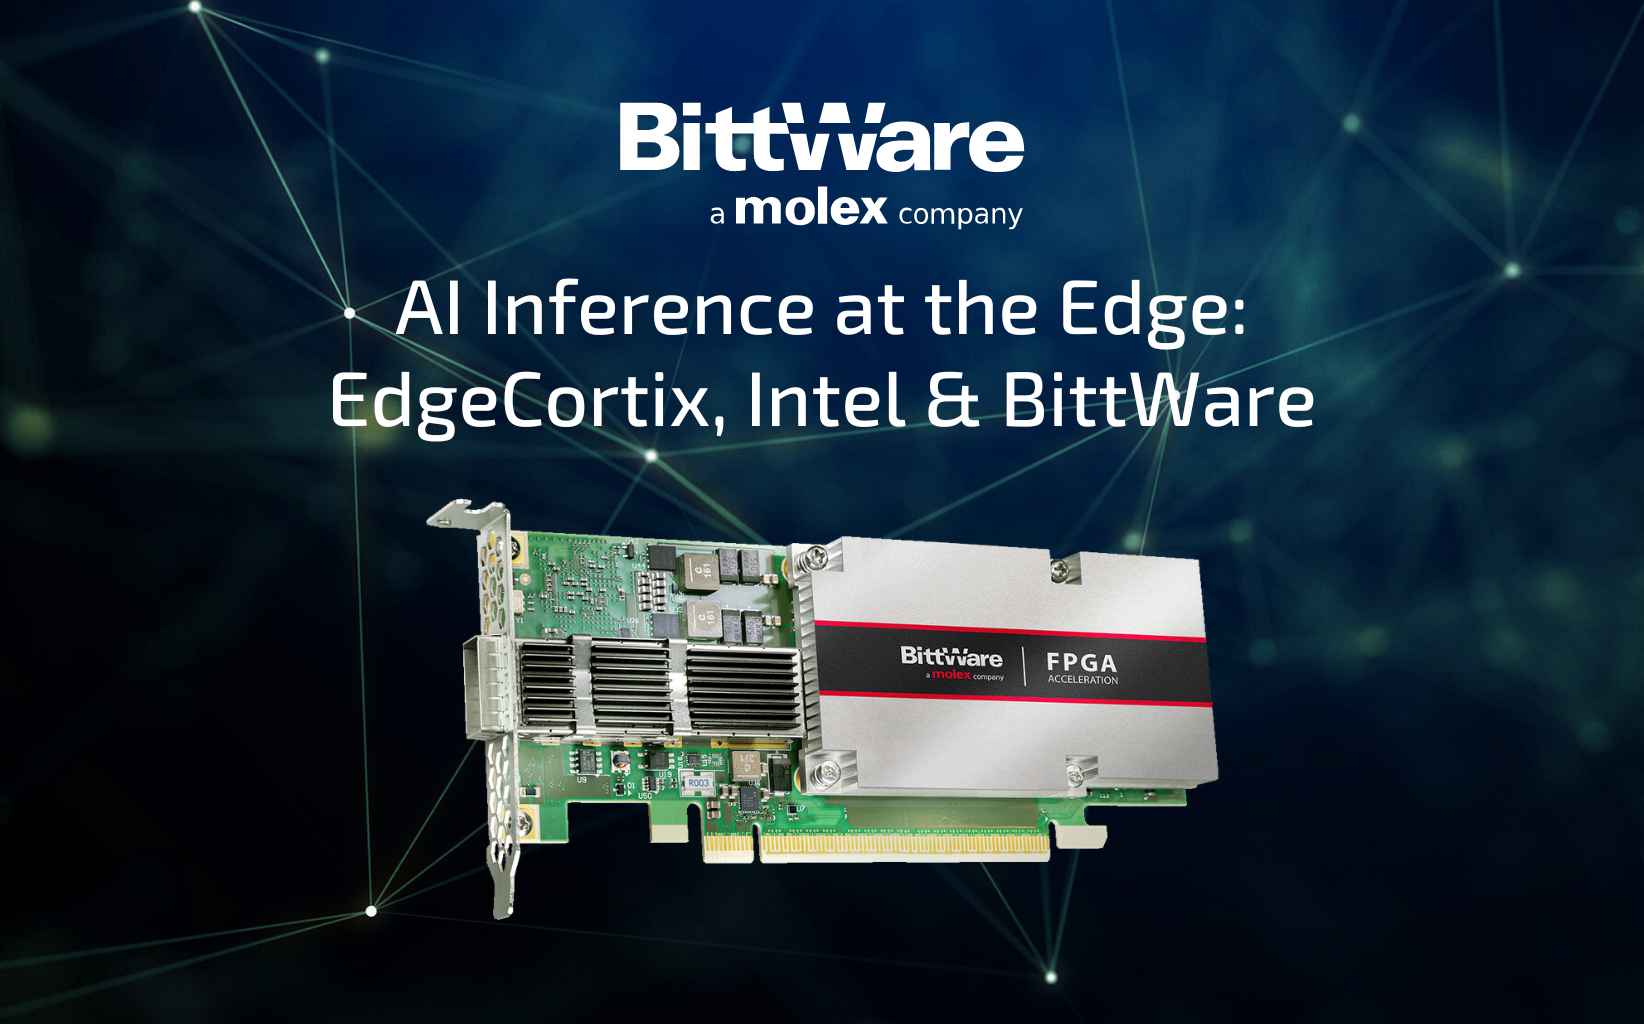 BittWare-Video-AI-Inference-at-the-Edge